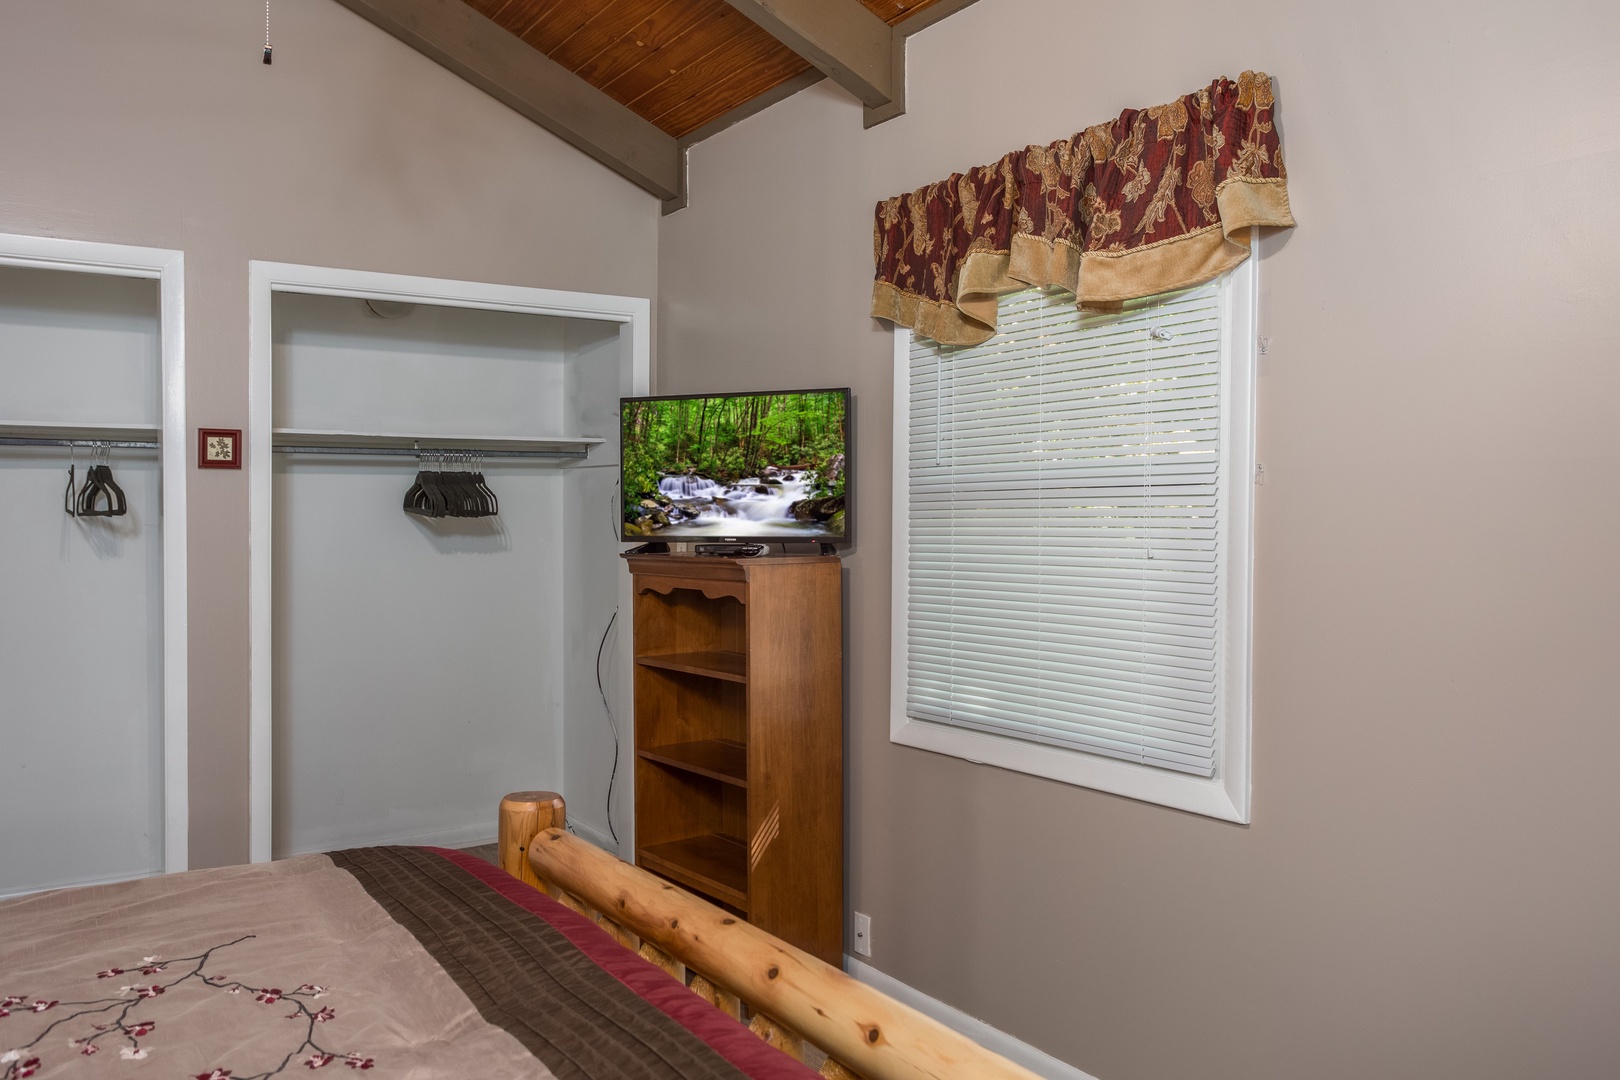 Cabinet, TV, and closets in a bedroom at Forever Country, a 3 bedroom cabin rental located in Pigeon Forge